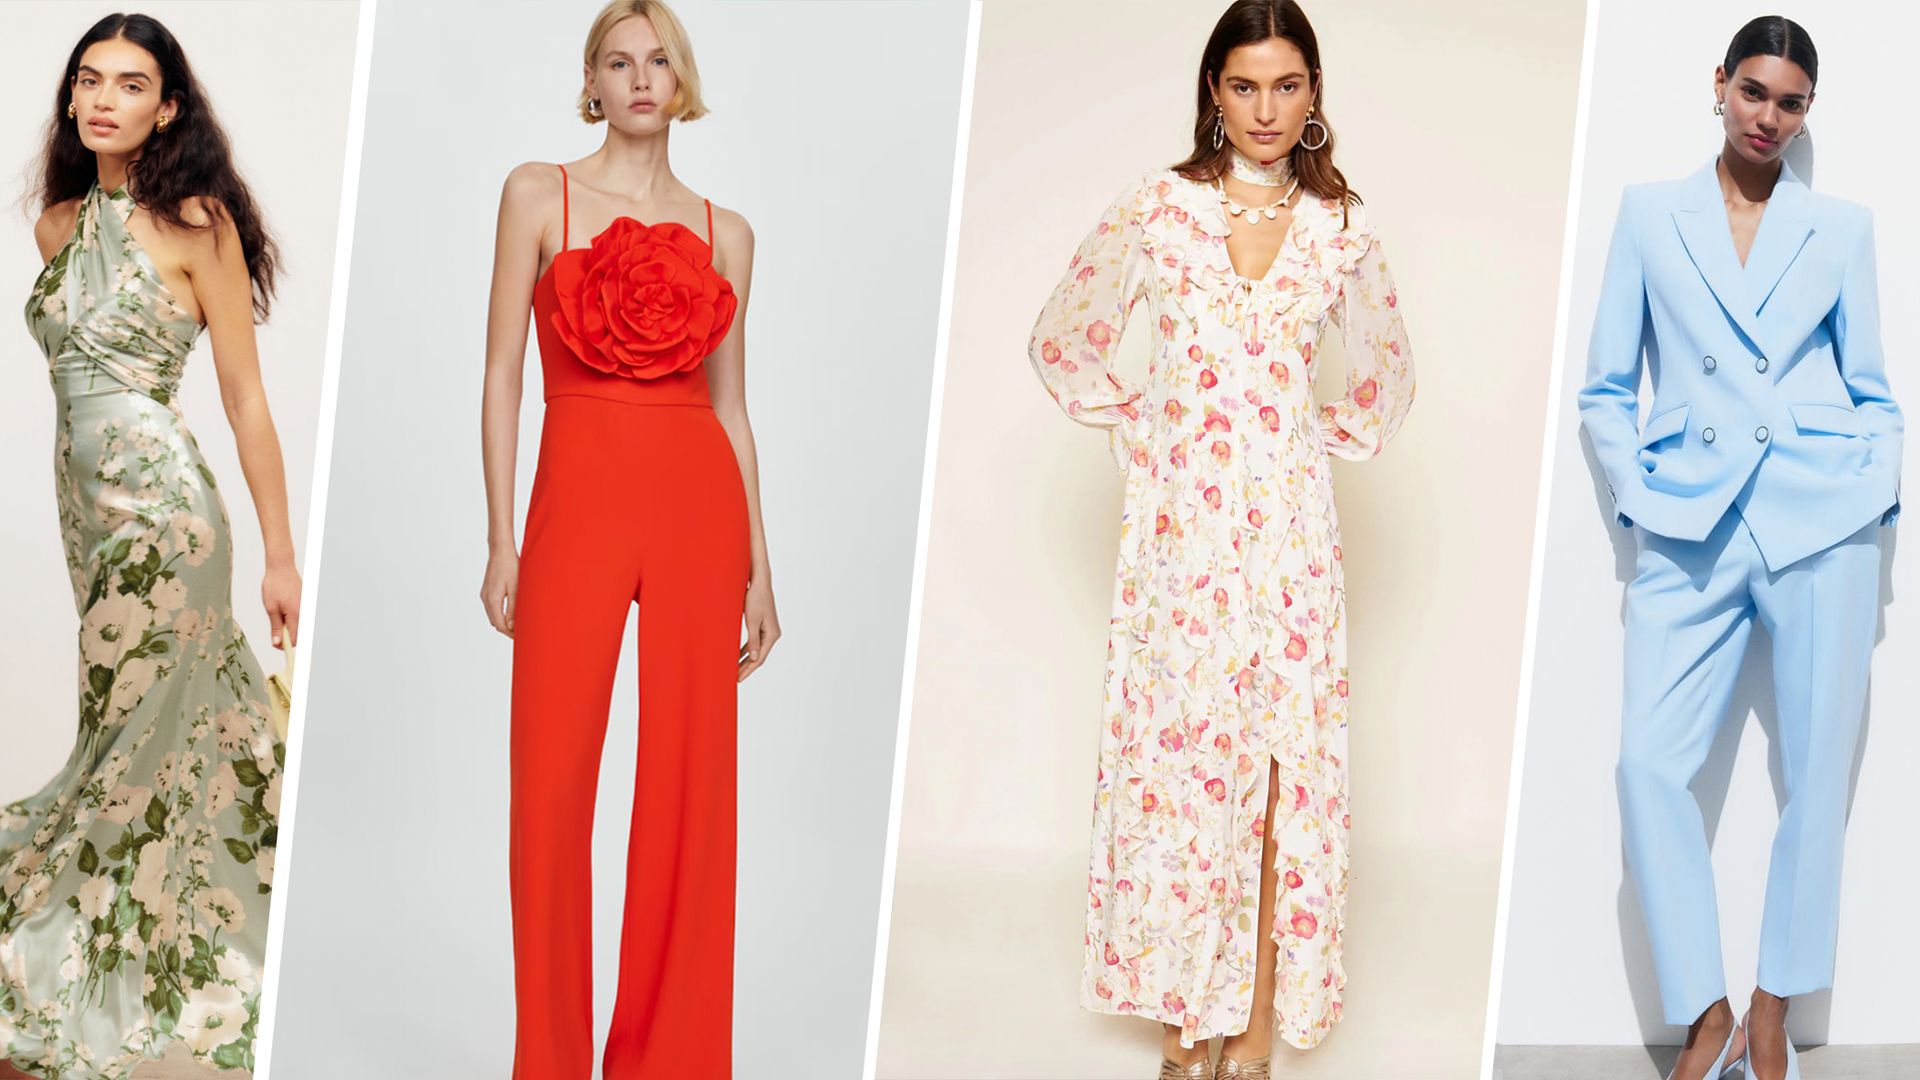 22 wedding guest outfit ideas: From beautiful dresses to chic jumpsuits